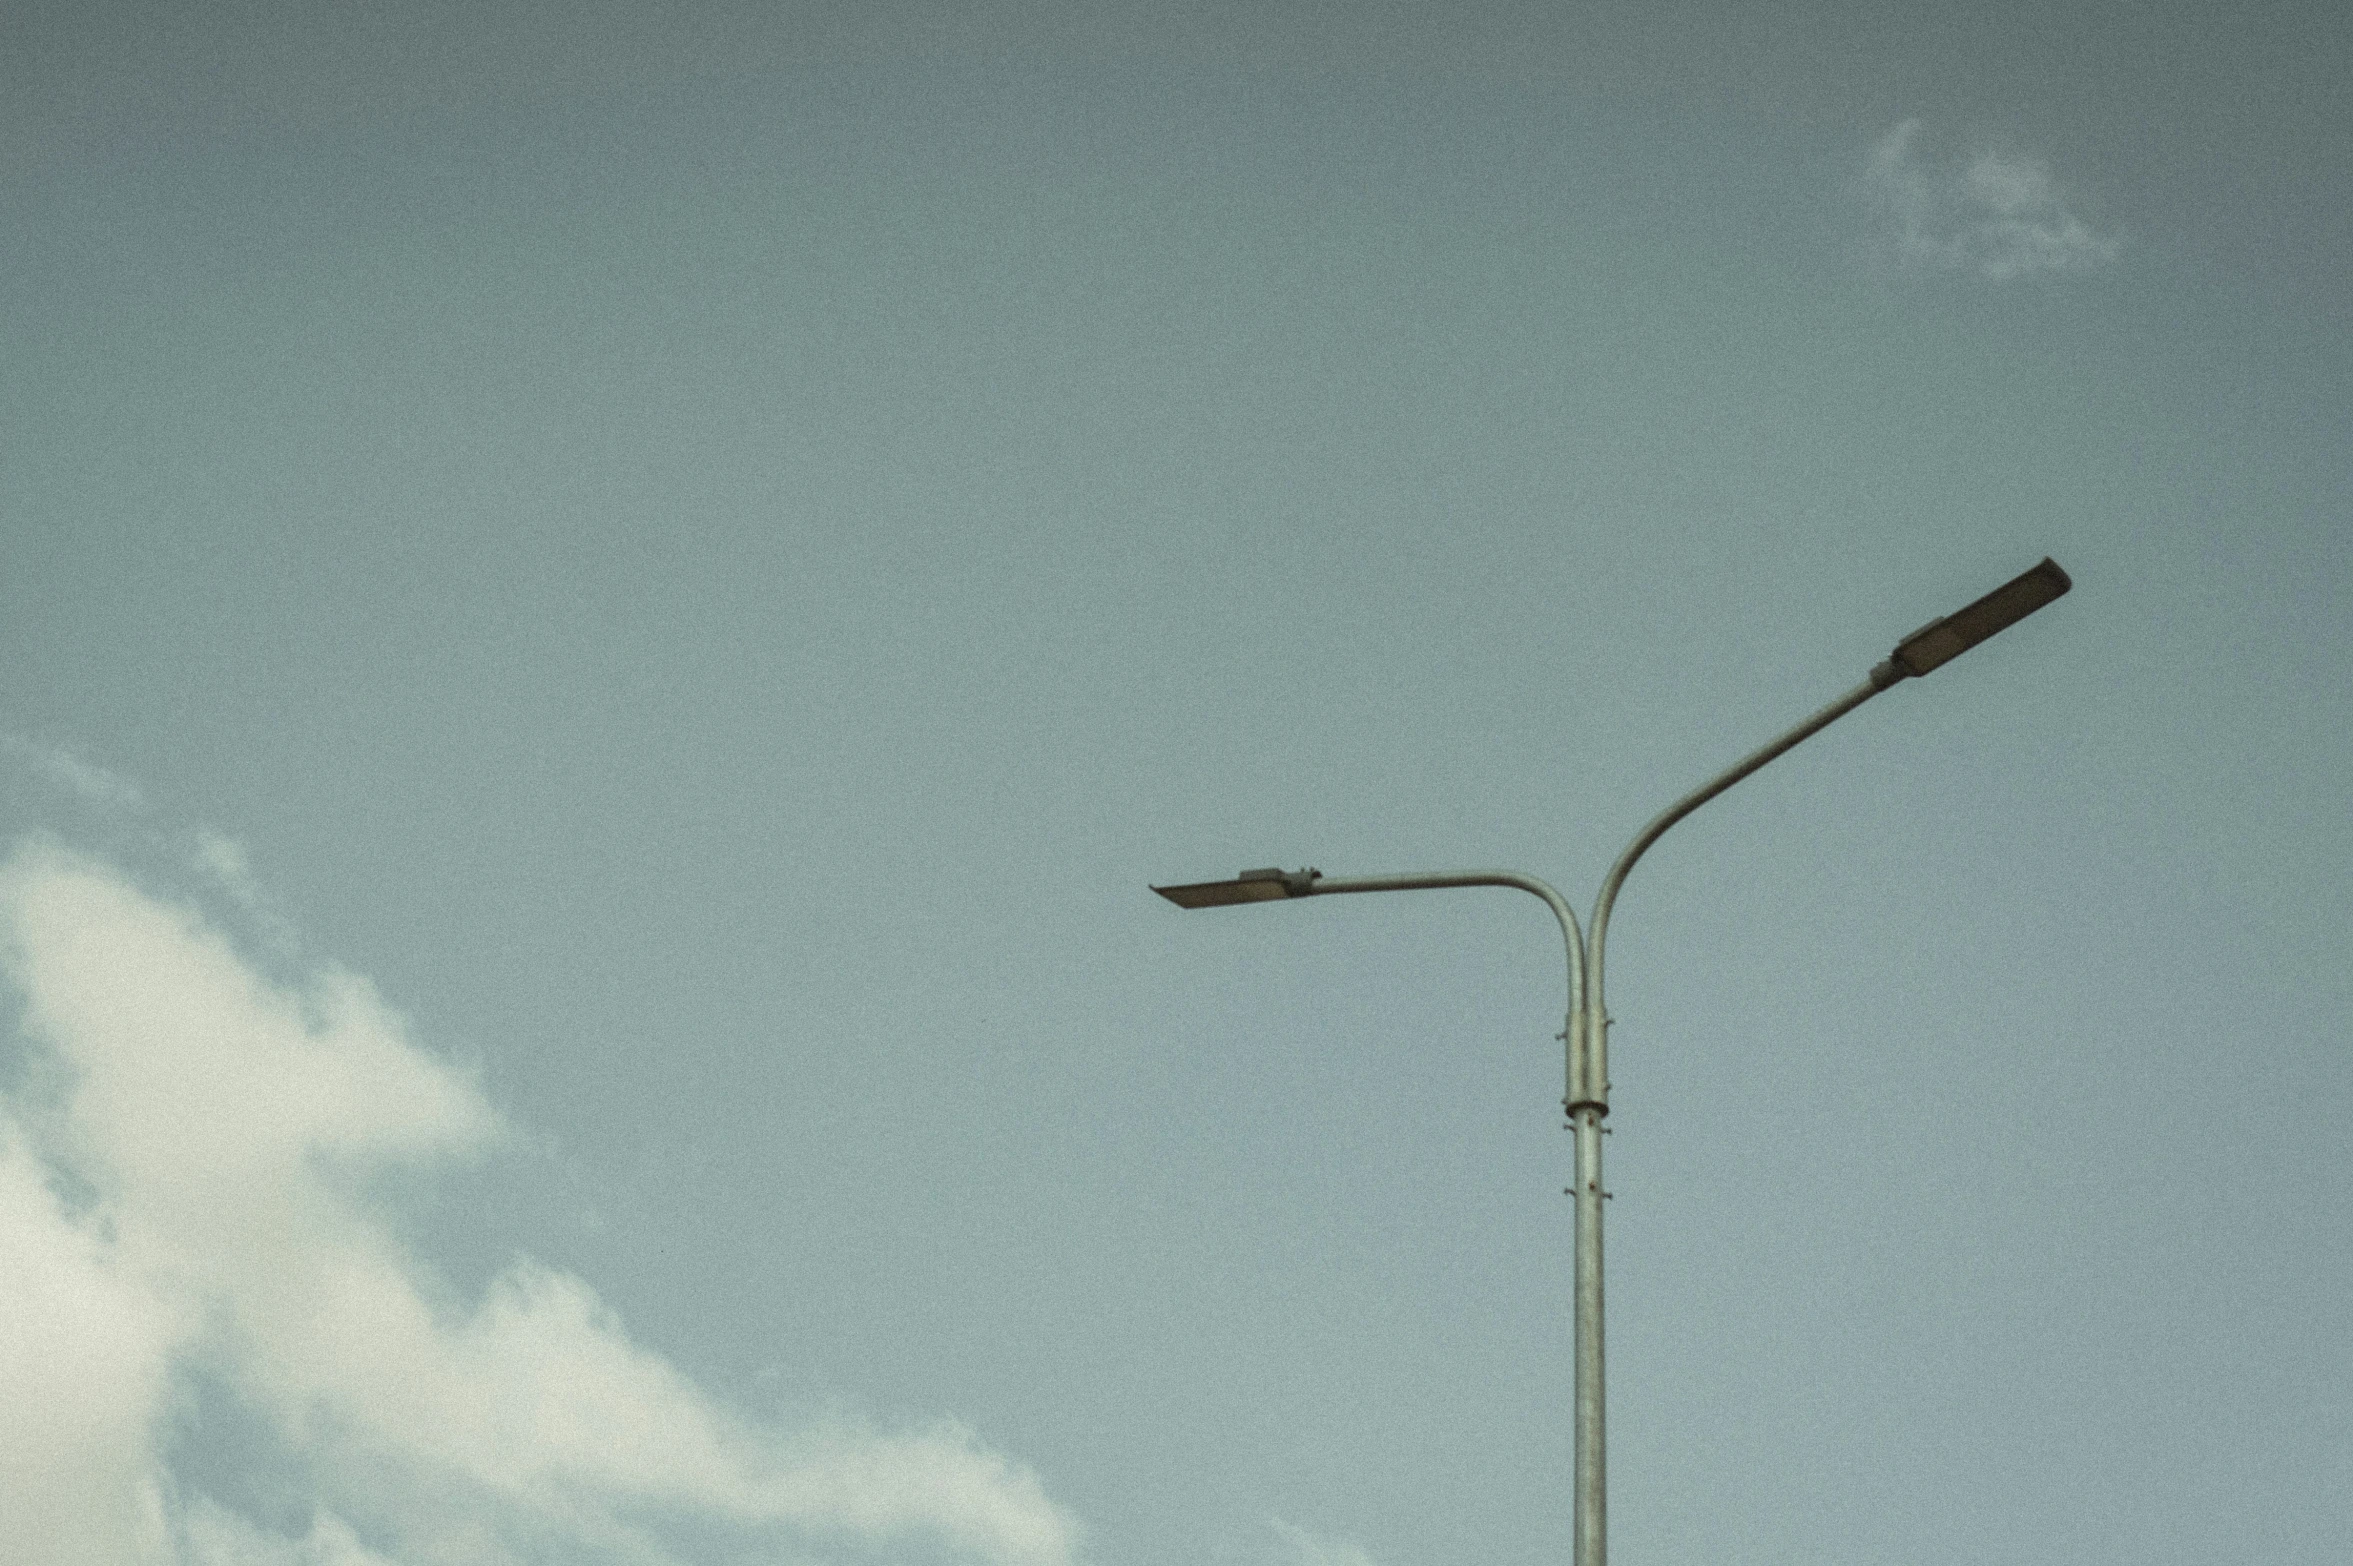 street lamps against a cloudy sky on a cloudy day